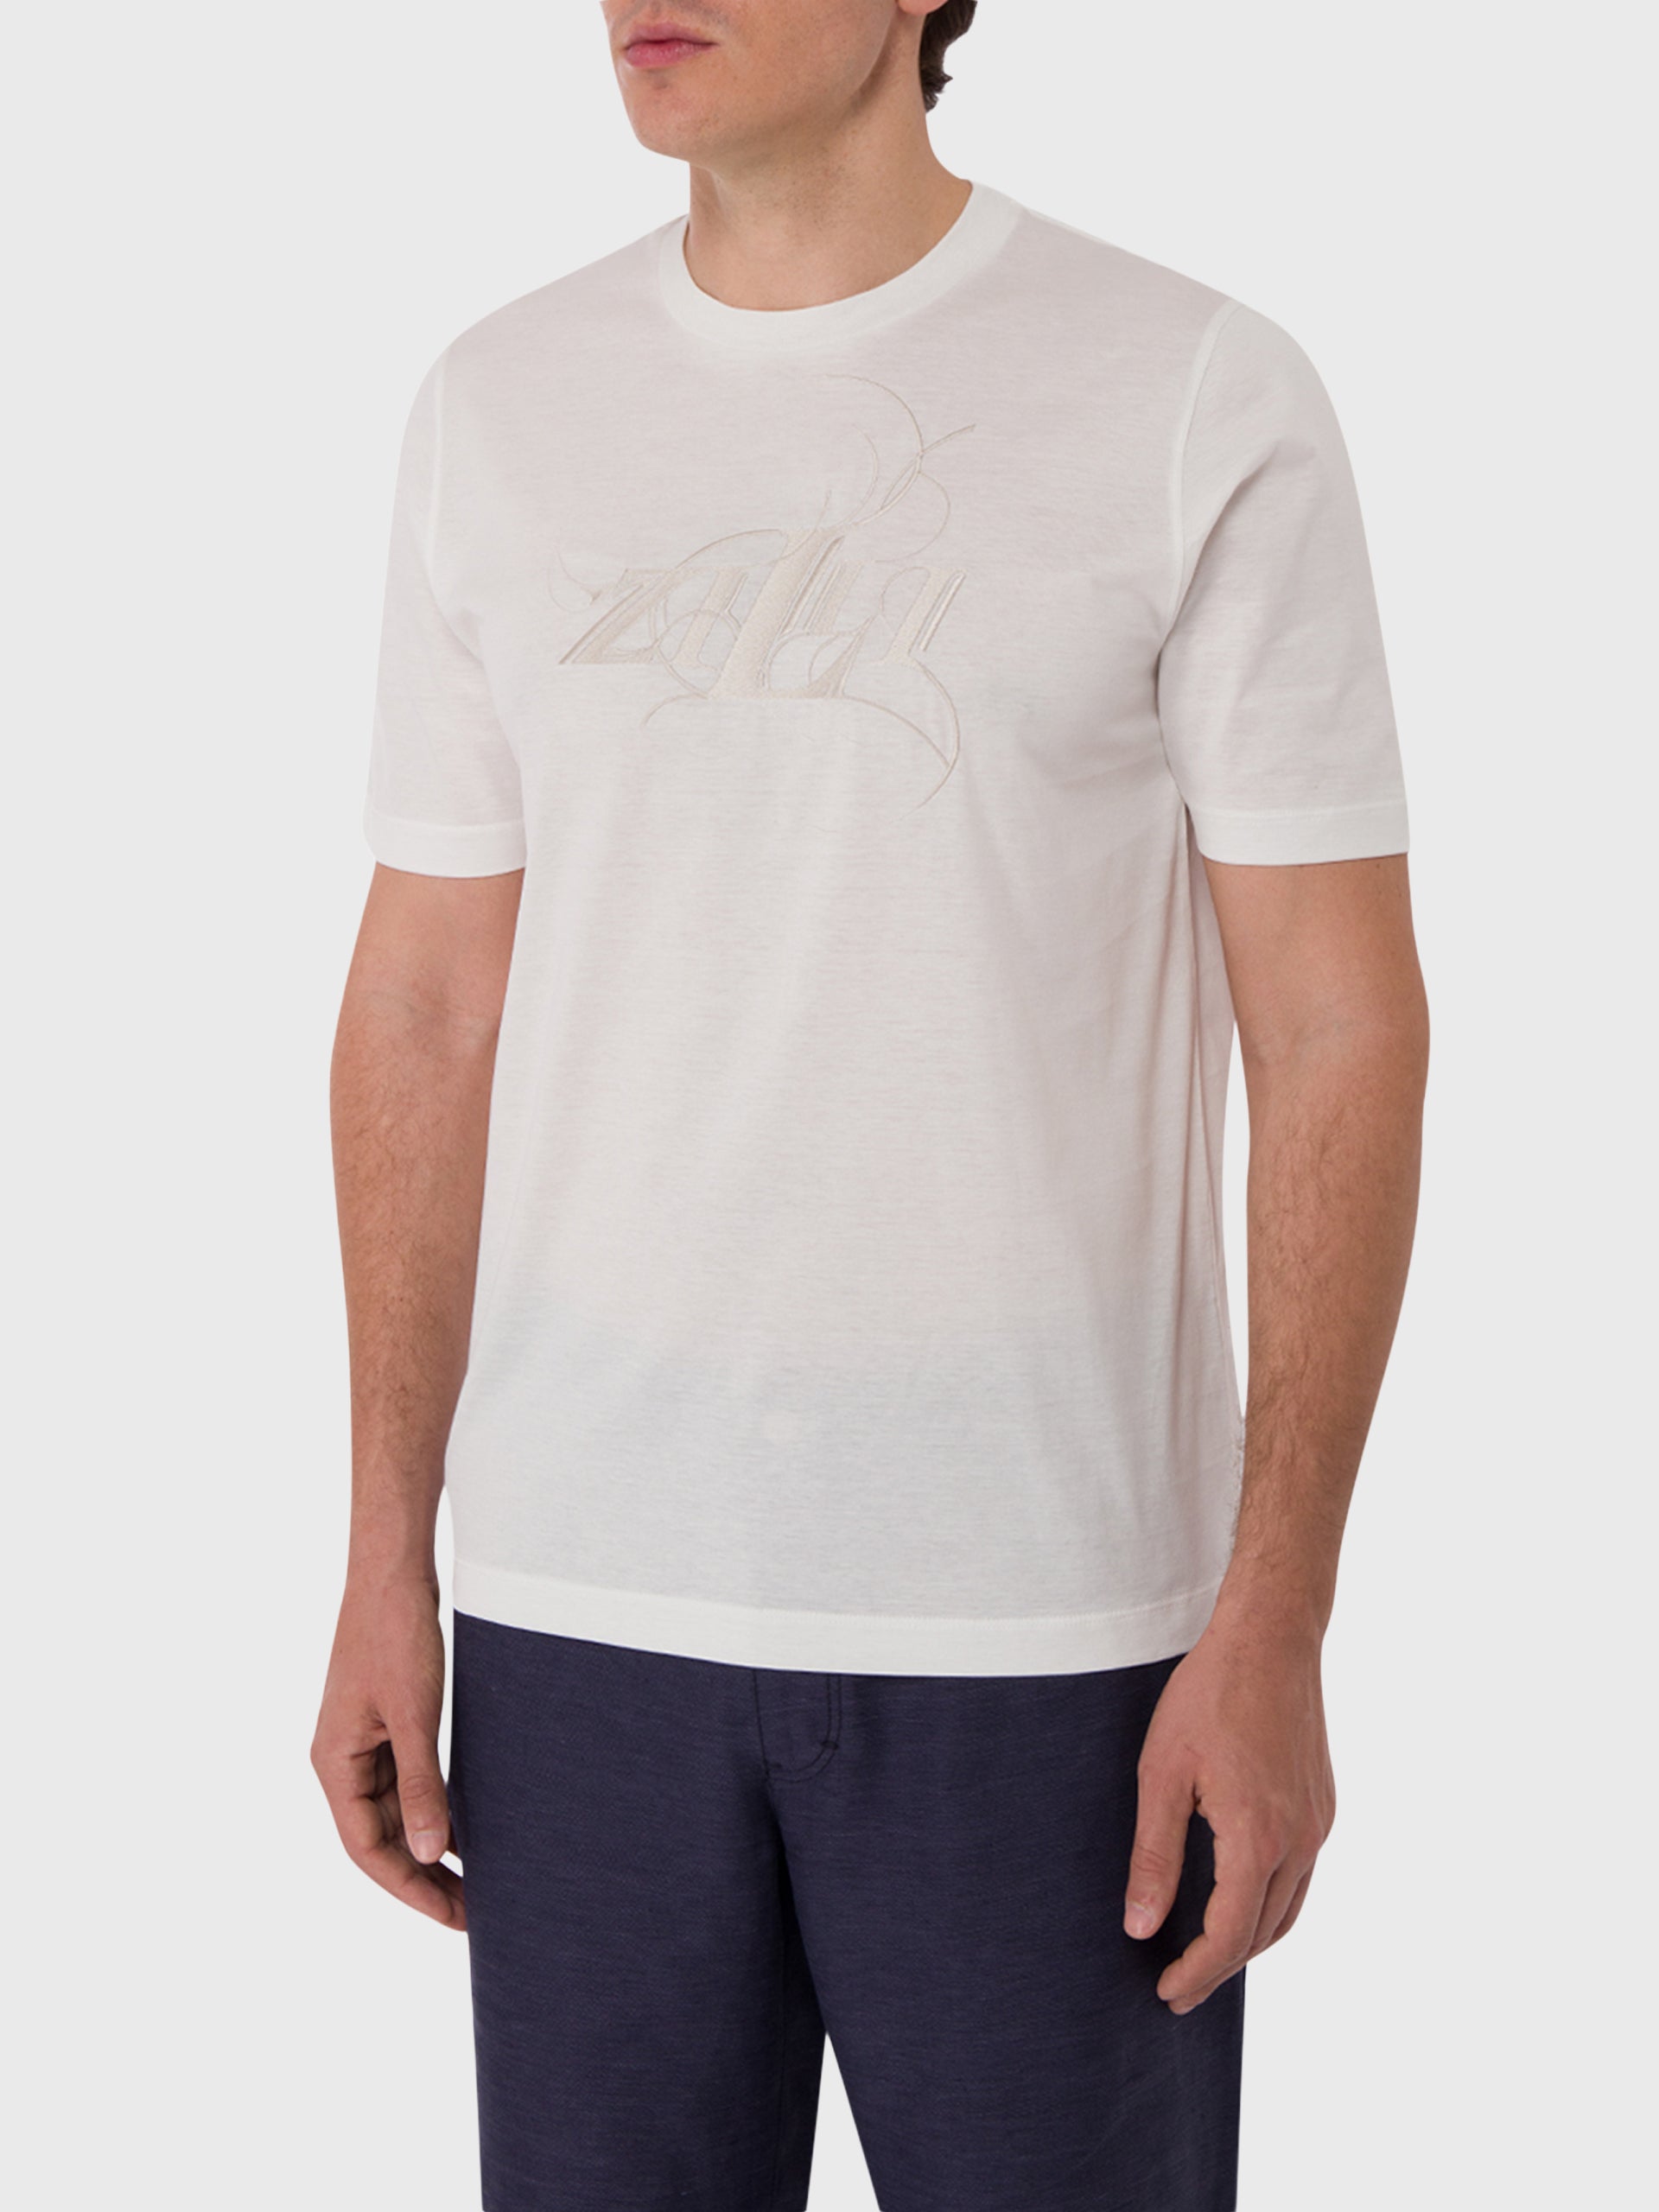 T-shirt with Stylized Zilli Lettering